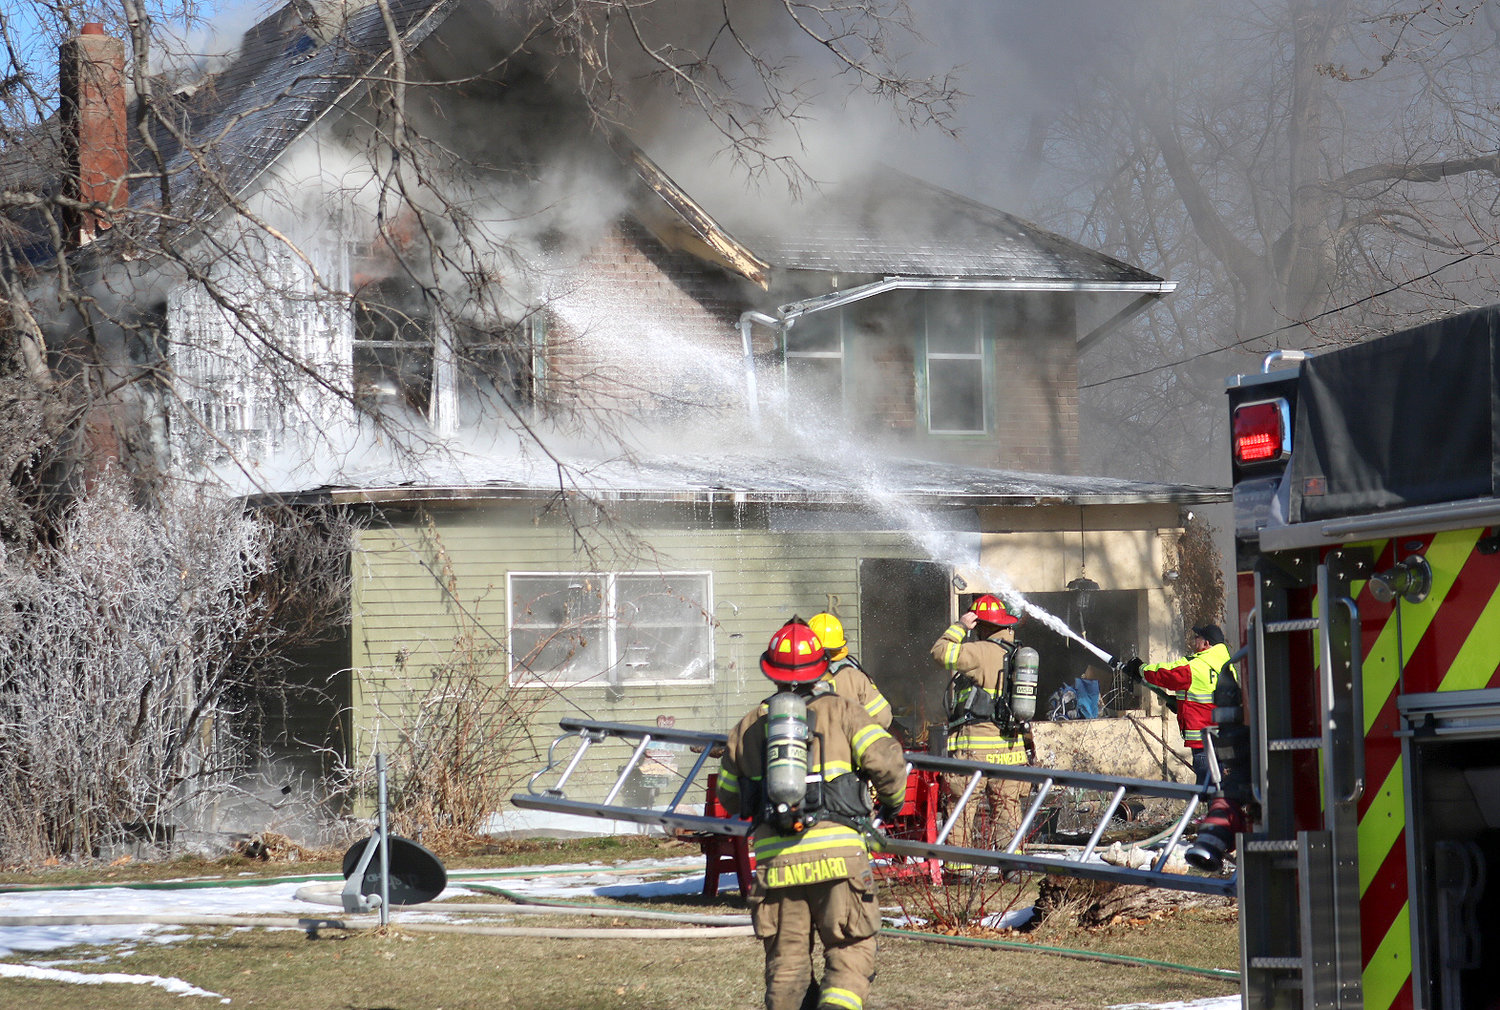 Fort Madison firefighters put water in the second floor window of a home at 1635 Avenue L Wednesday afternoon. The fire started in a chimney from a wood burning stove on the first floor living room. No one was injured in the fire. Photo by Chuck Vandenberg/PCC